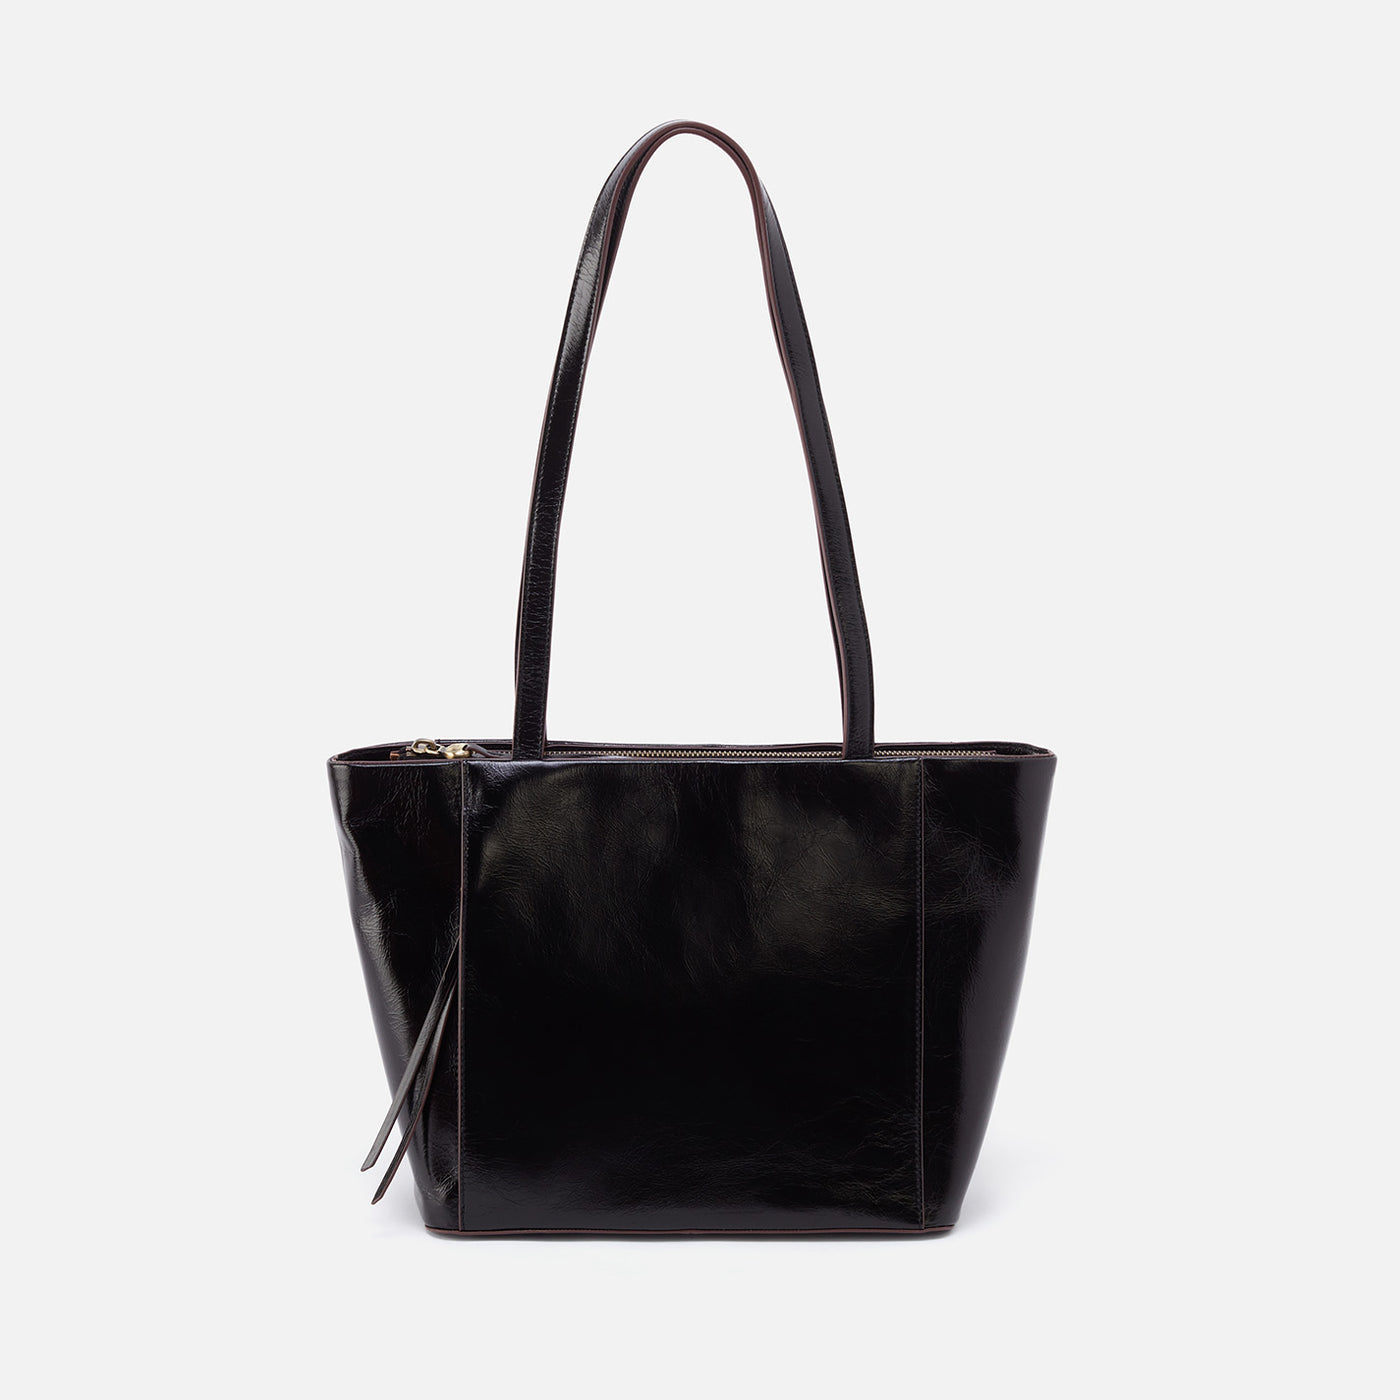 Haven Tote in Polished Leather - Black